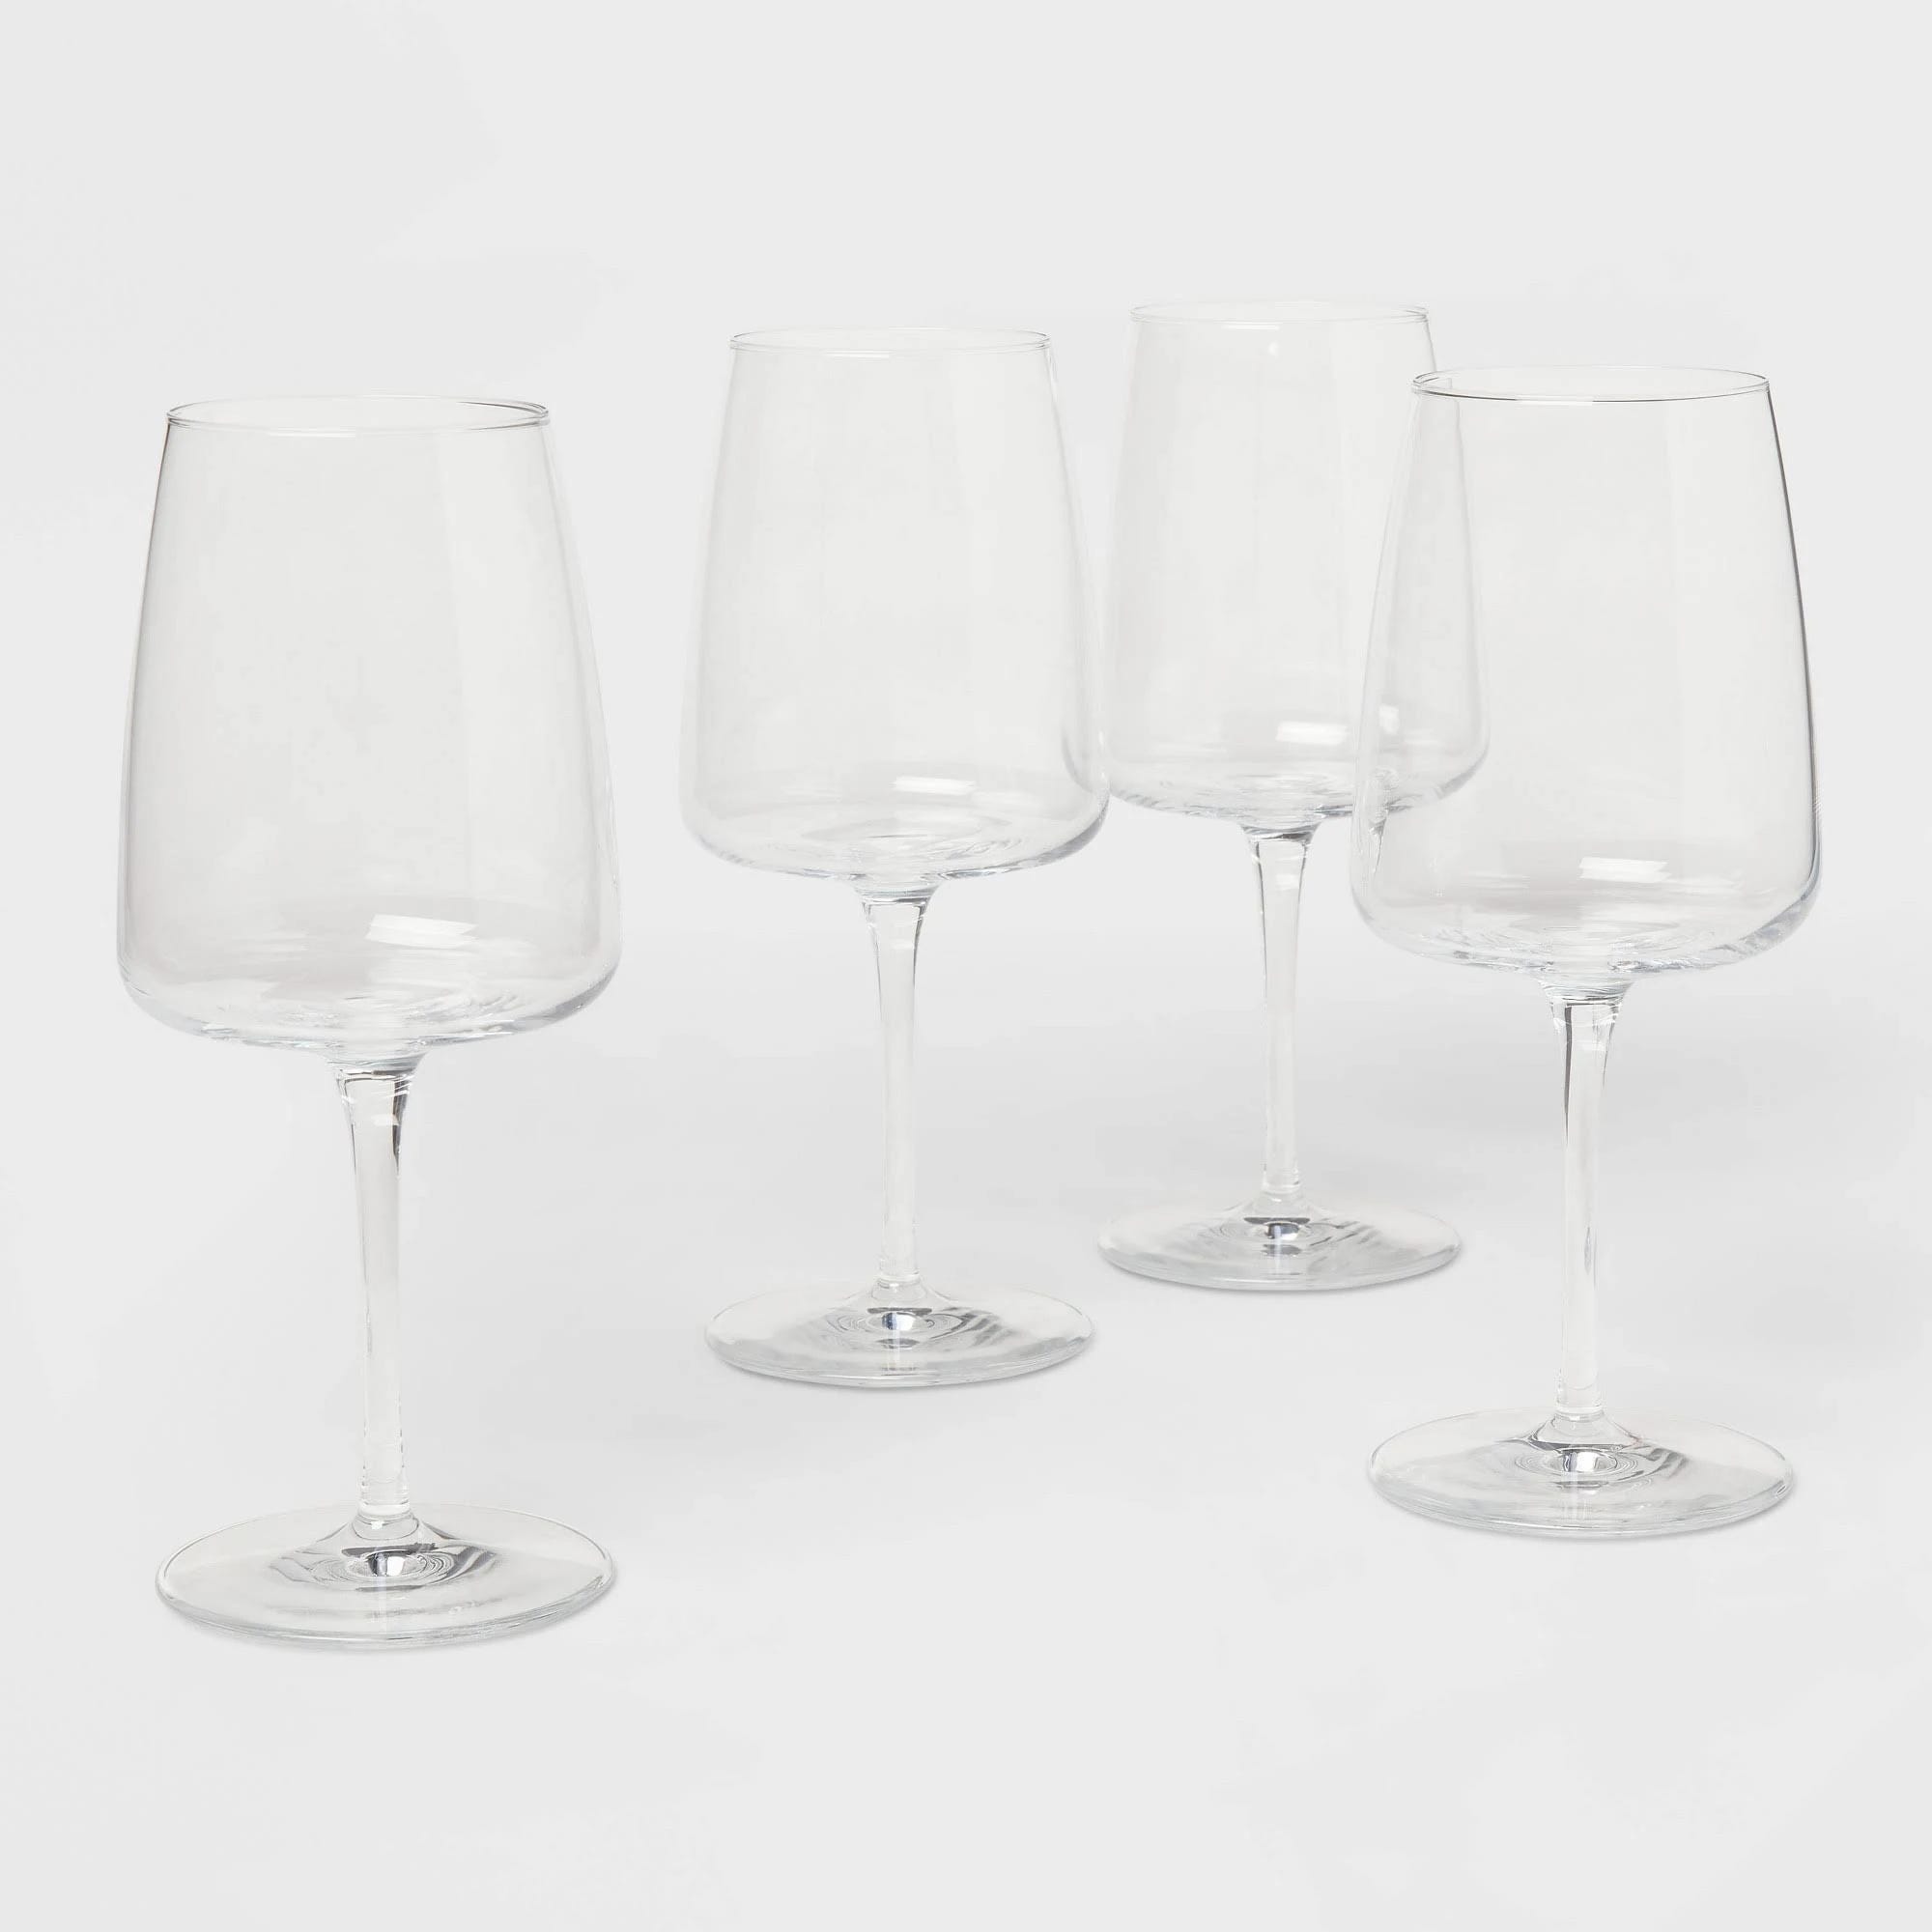 Threshold 4pk Red Wine Glasses - Perfect for Cold Beverages and Easy Cleaning | Image